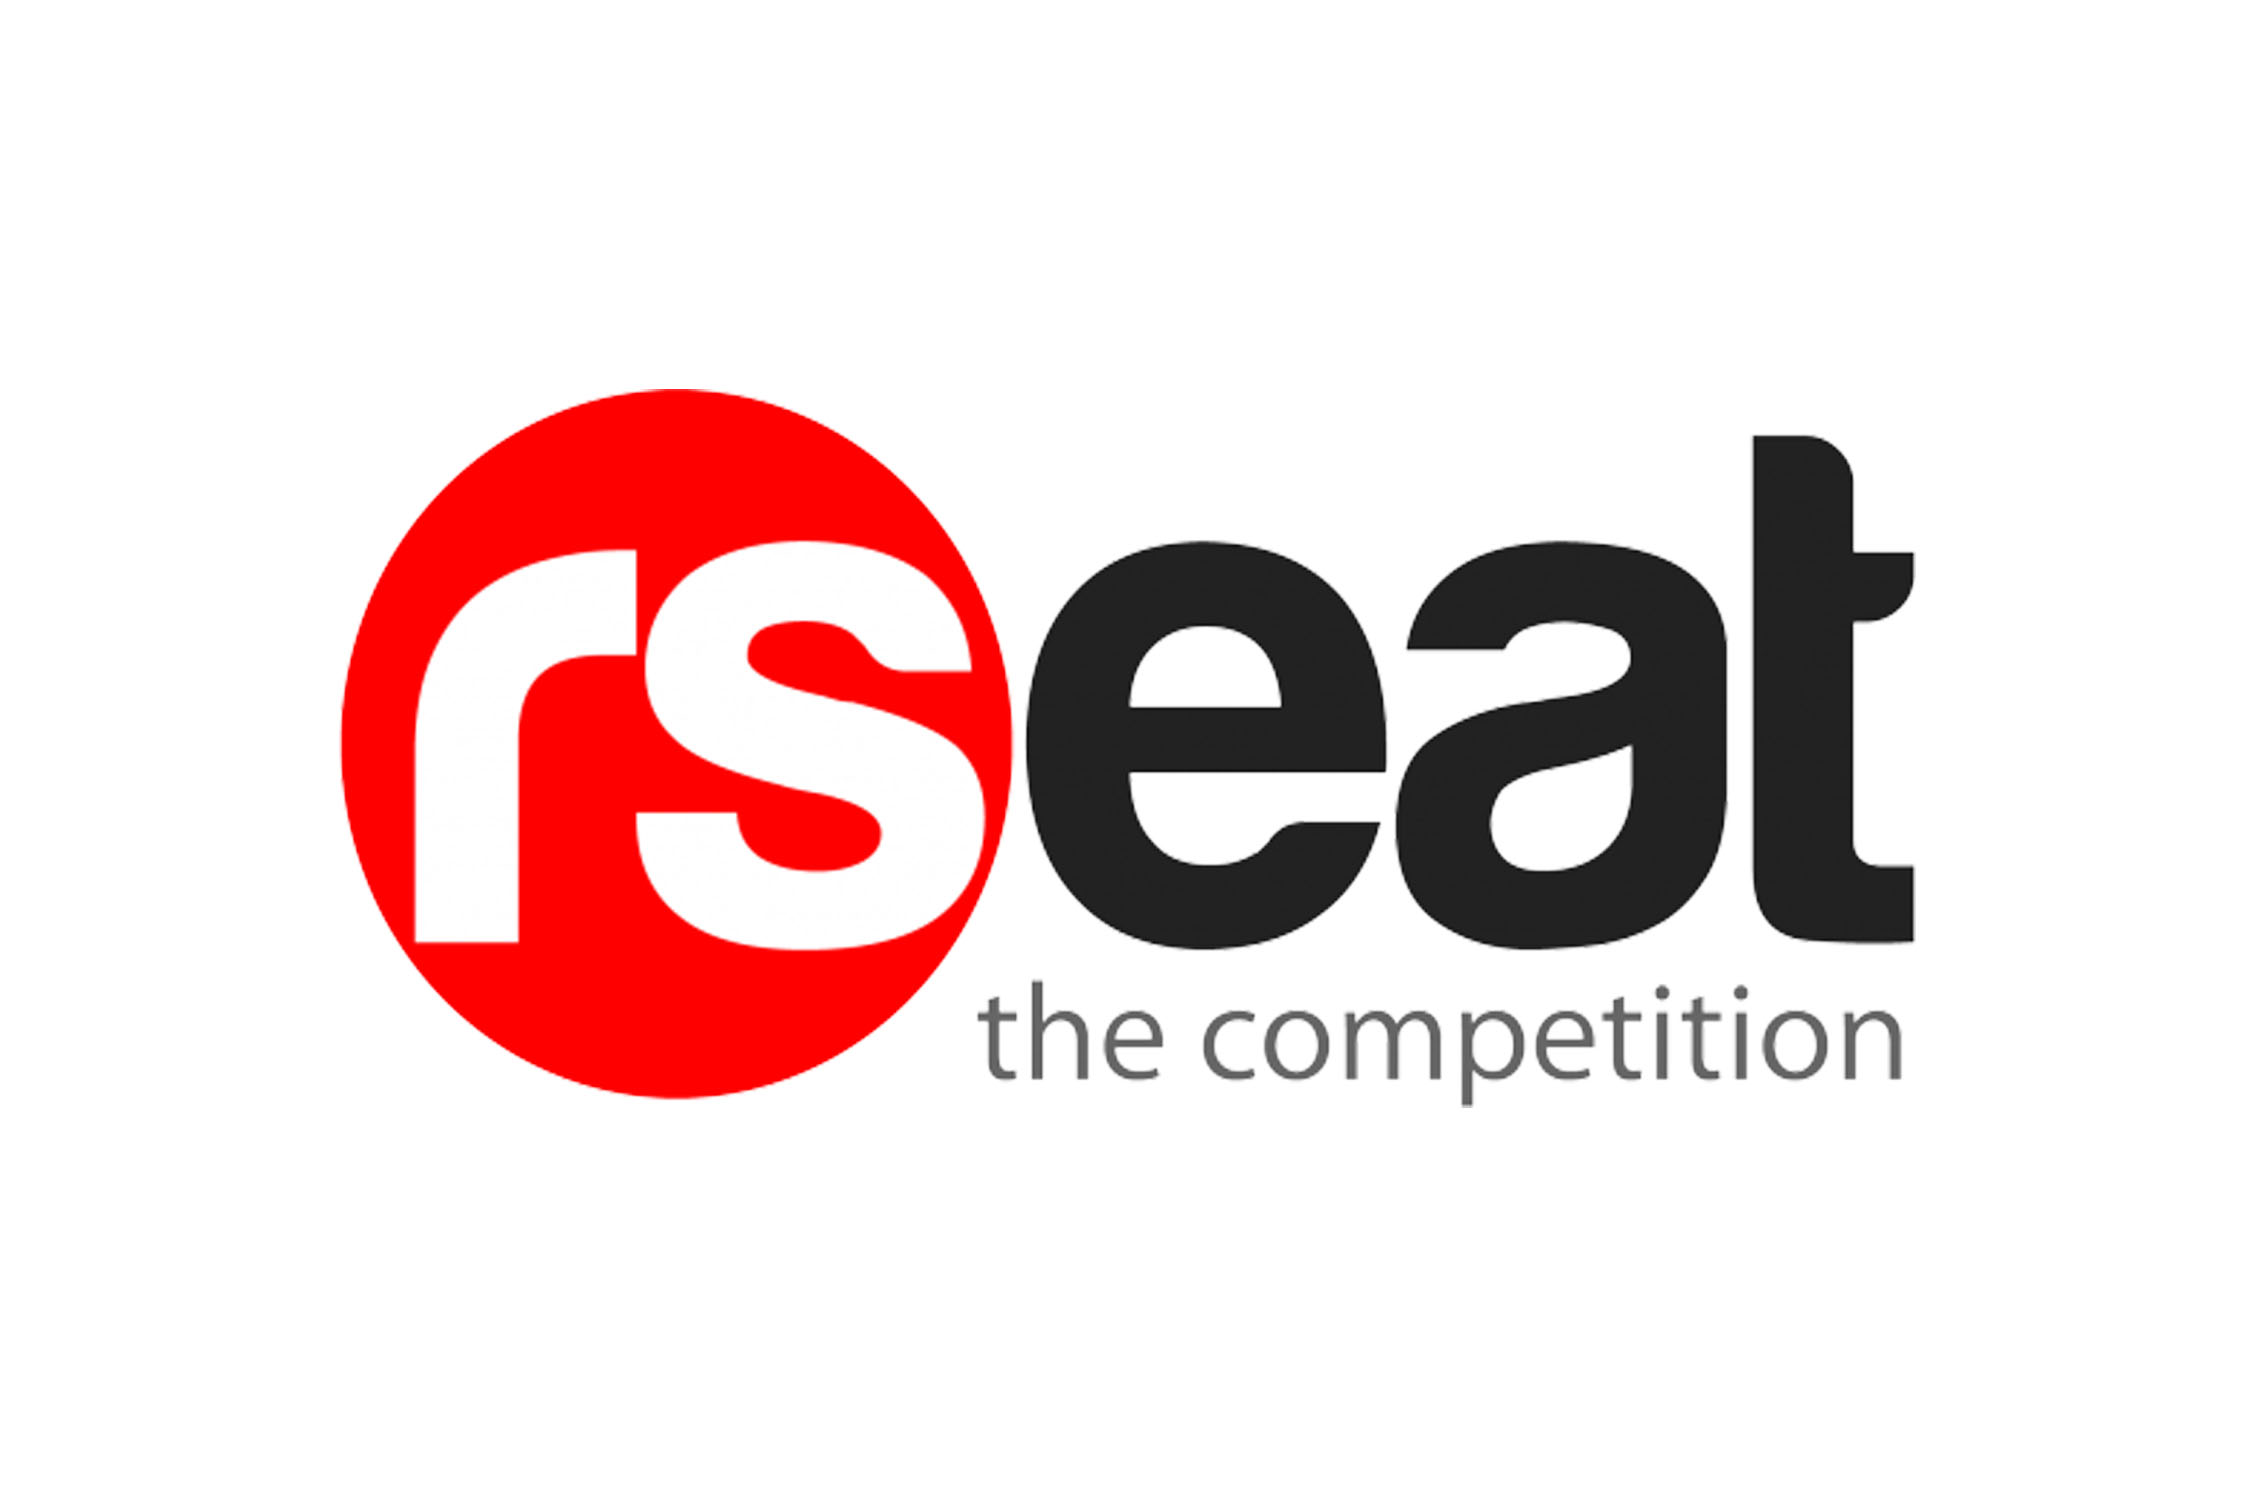 rseat chassis